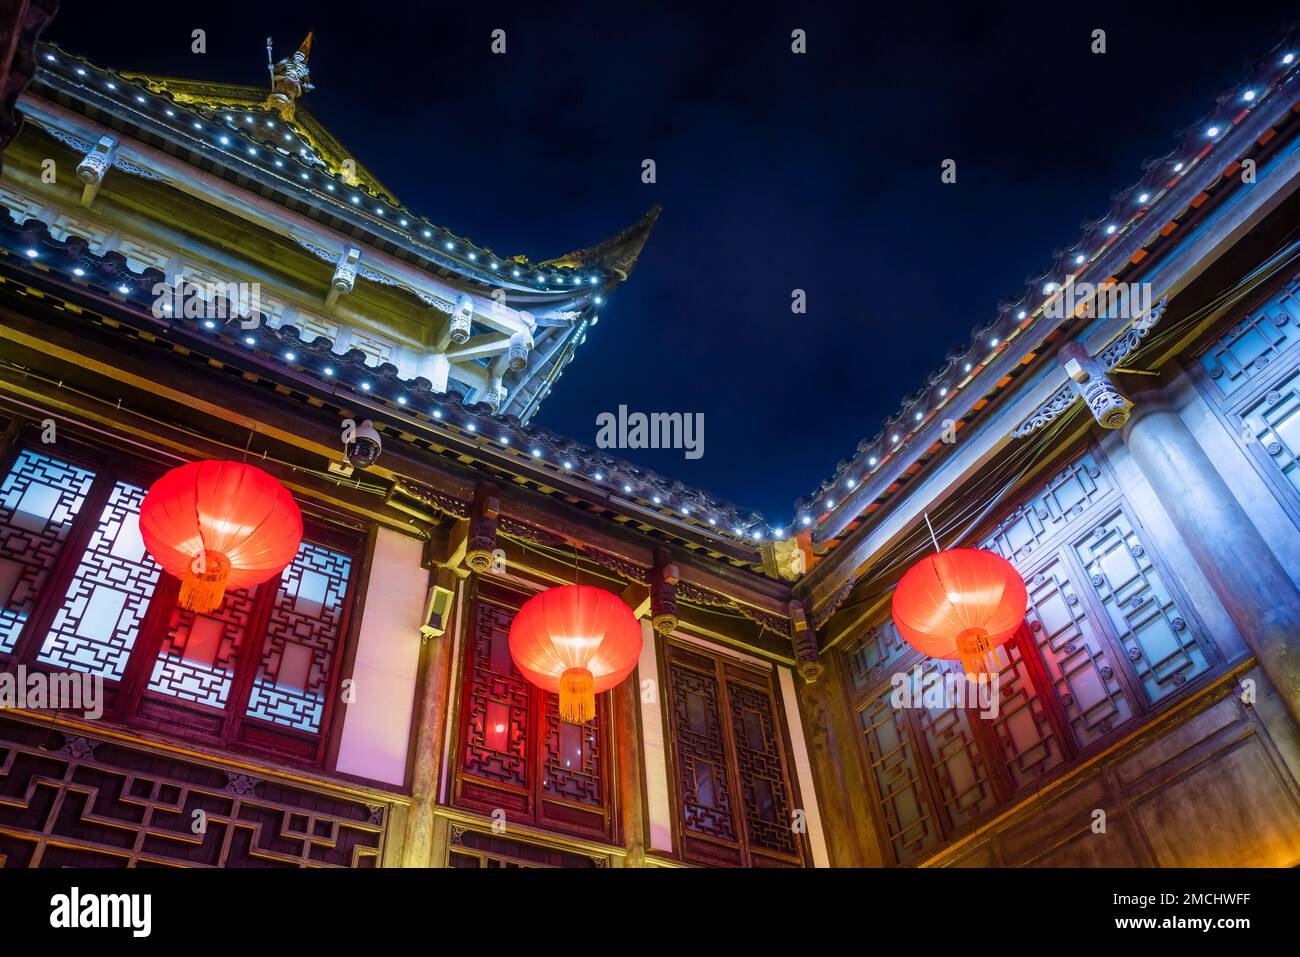 Red Chinese lanterns hanging on a traditional Chinese building at night Stock Photo